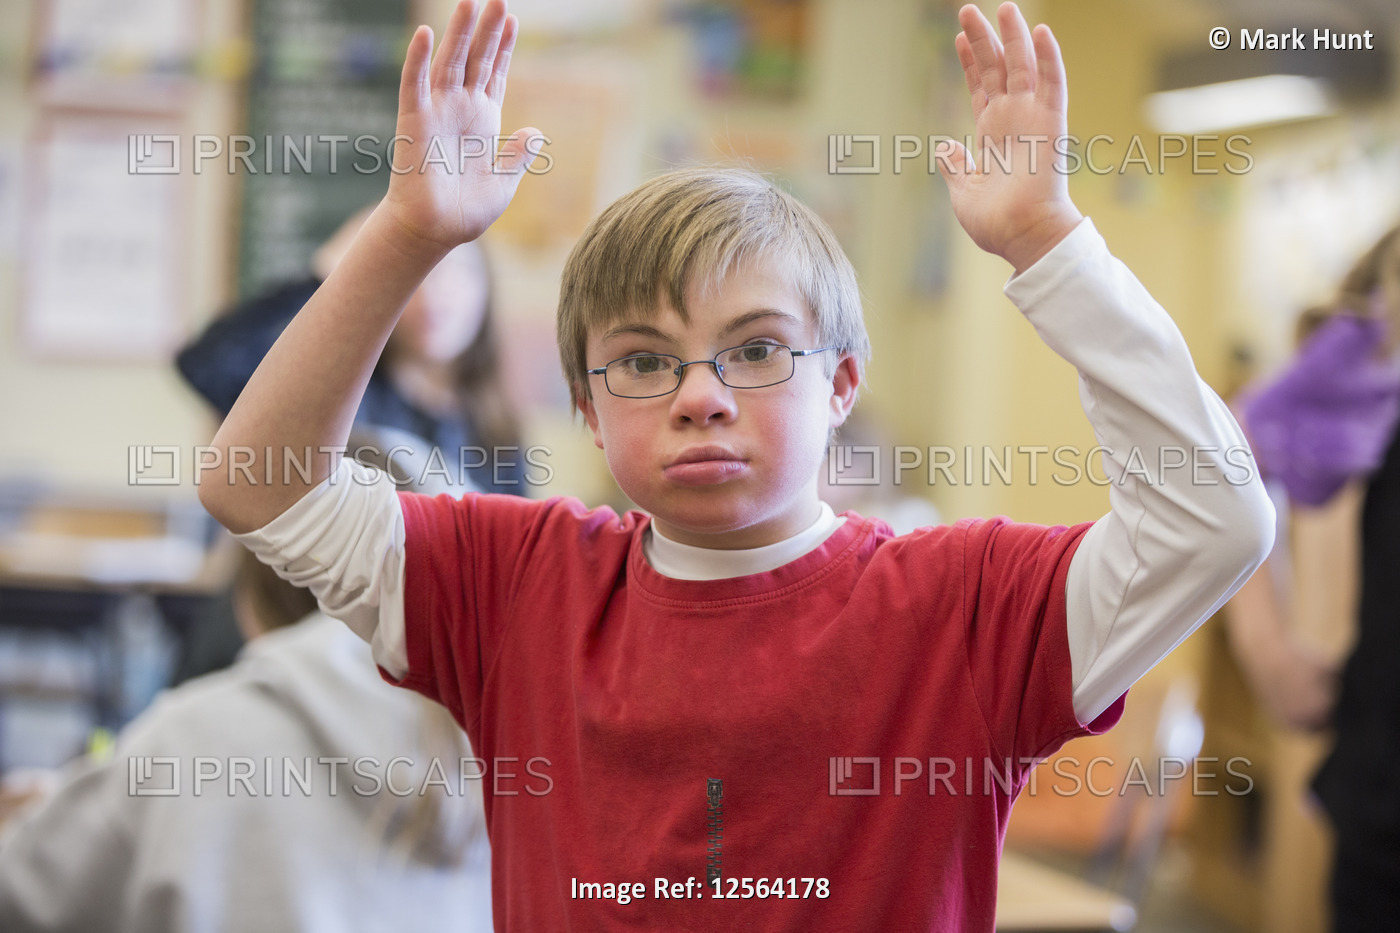 Boy with Down syndrome arms raised in a school classroom